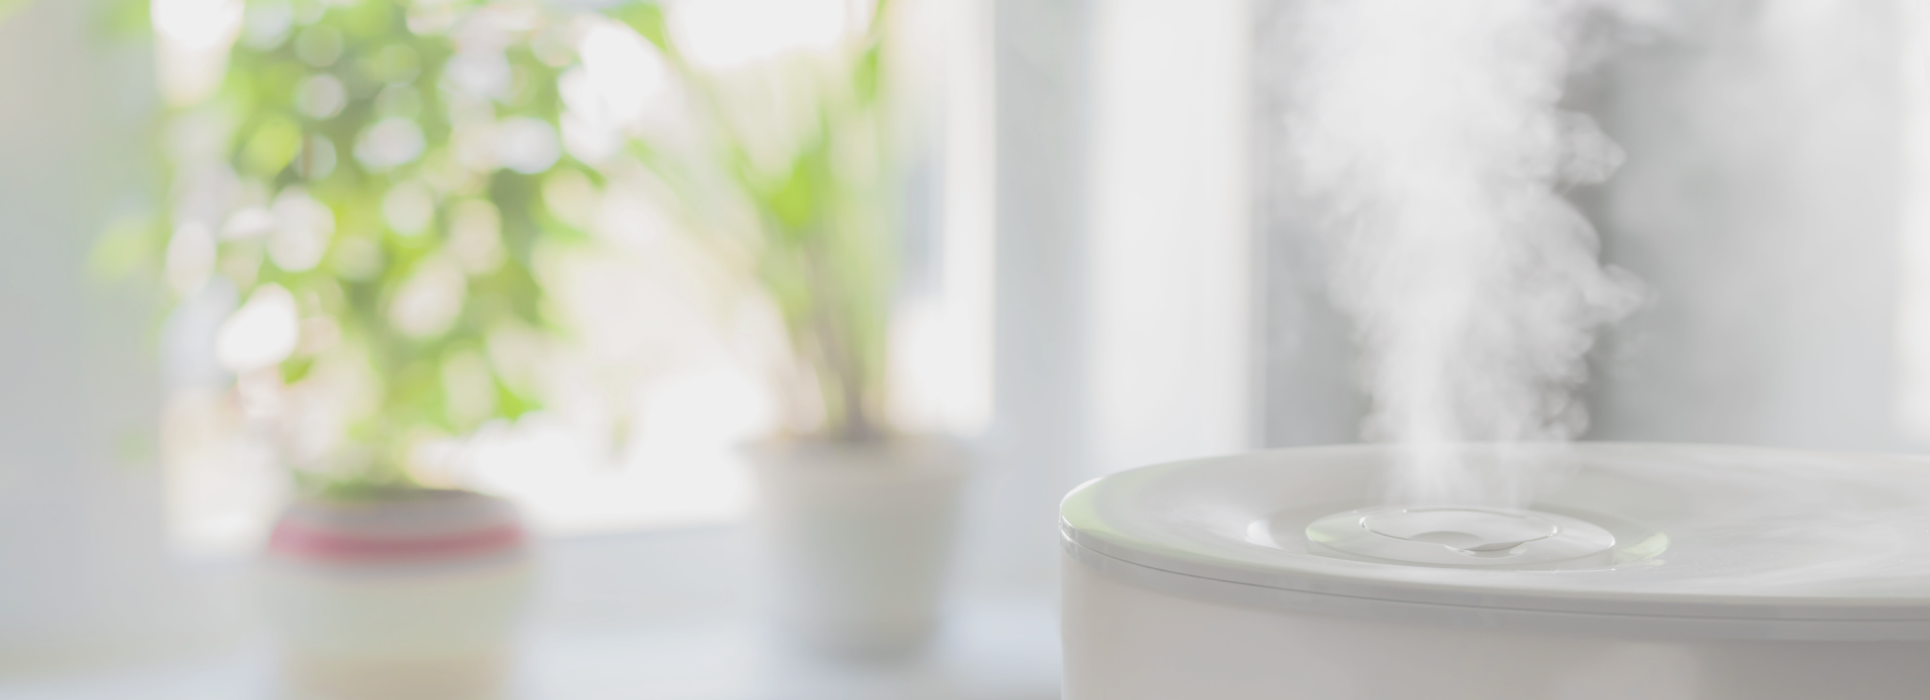 Smart Humidifiers Vs Traditional Humidifiers: Which One Is Better For You?